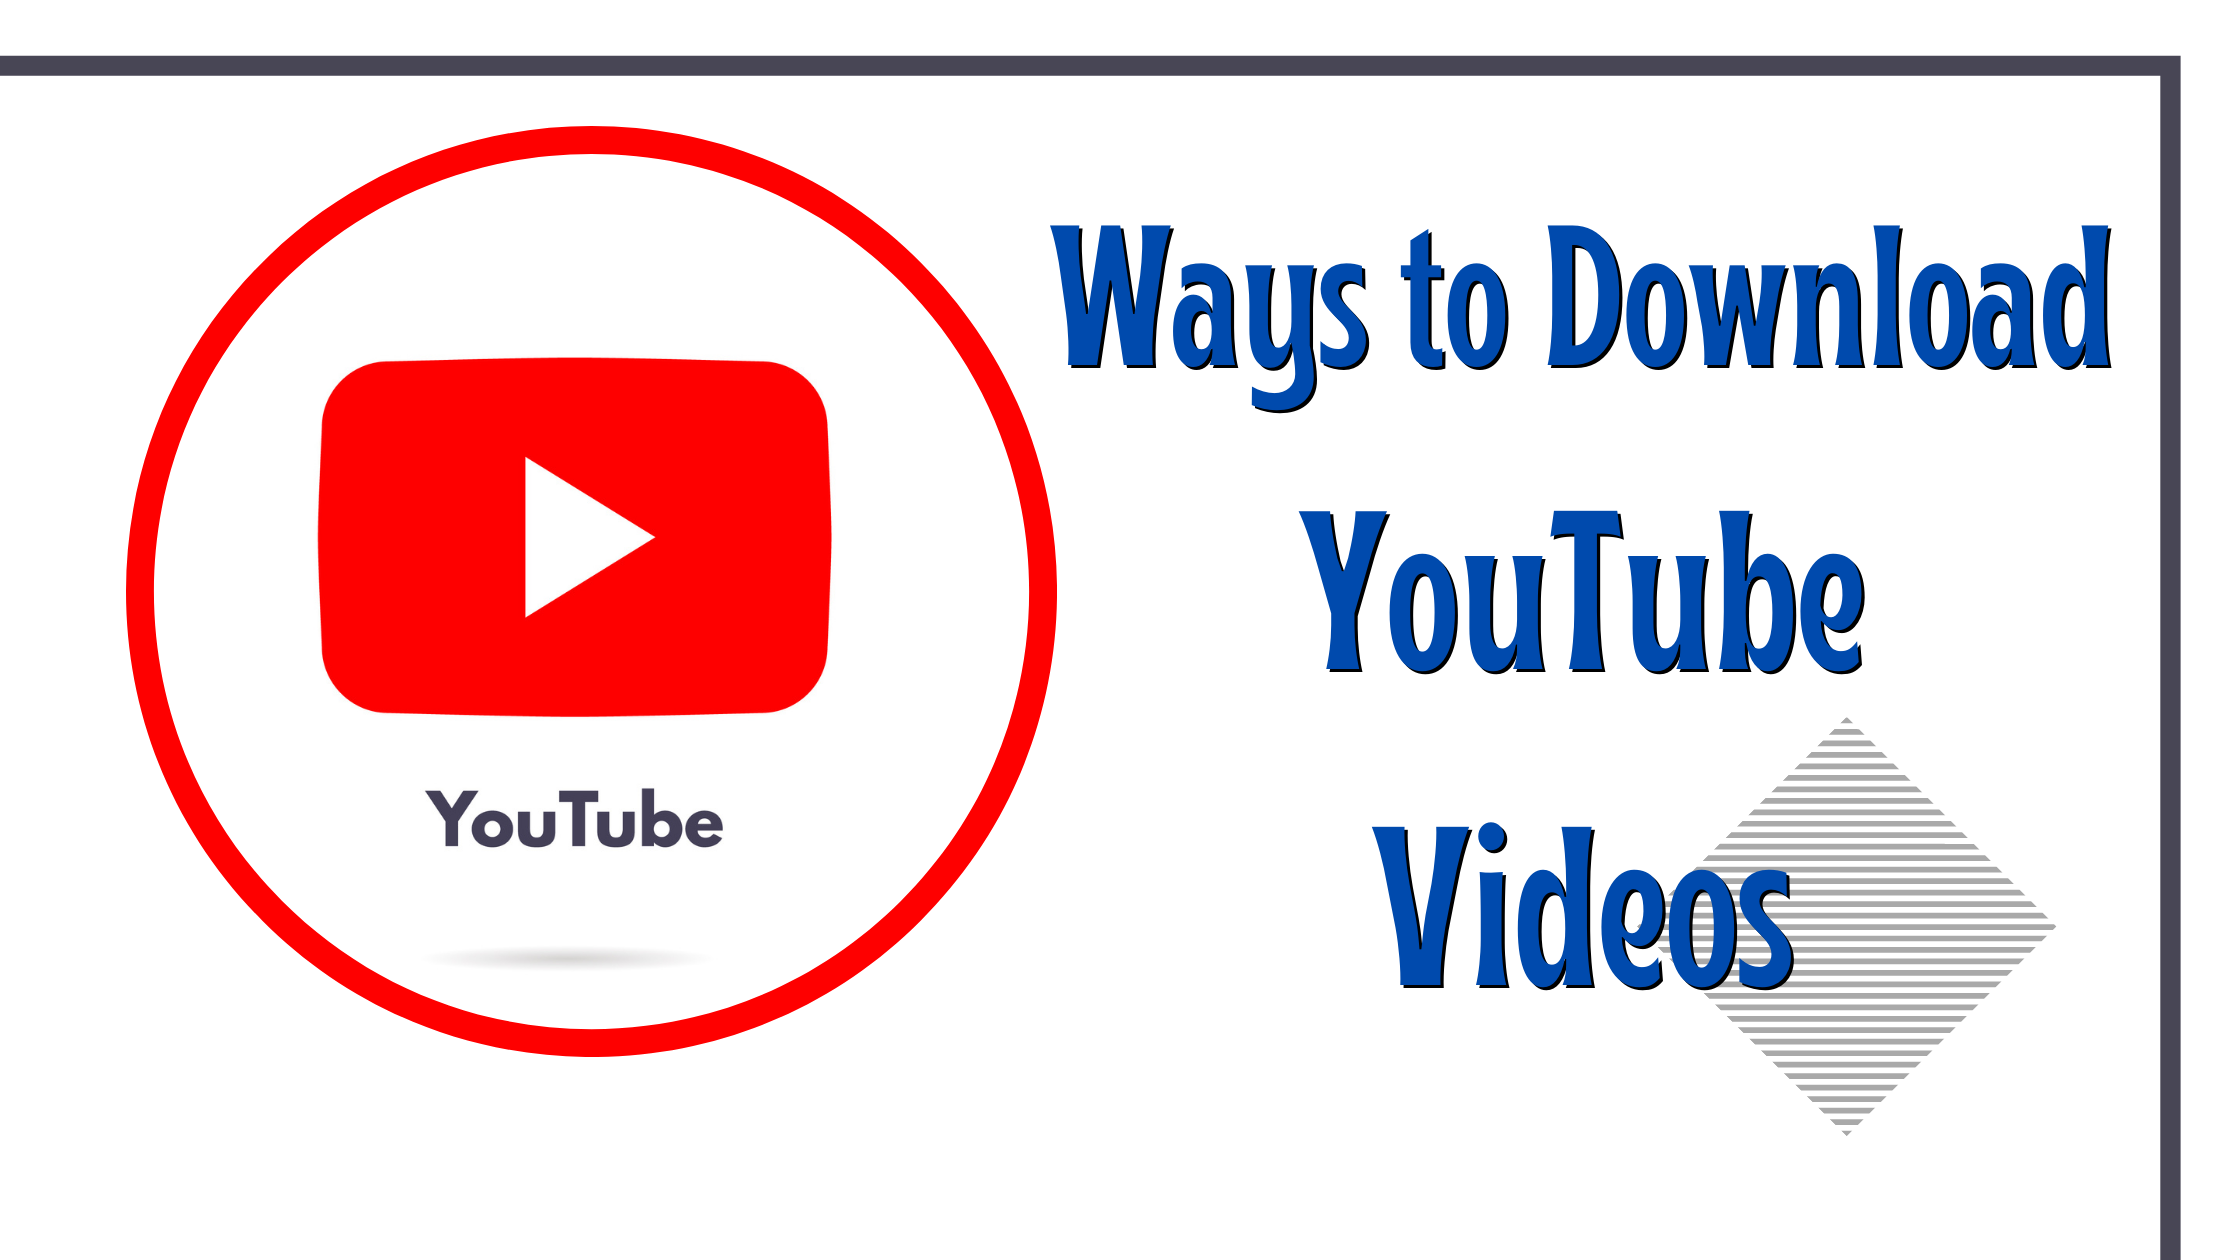 Ways to Download YouTube Videos